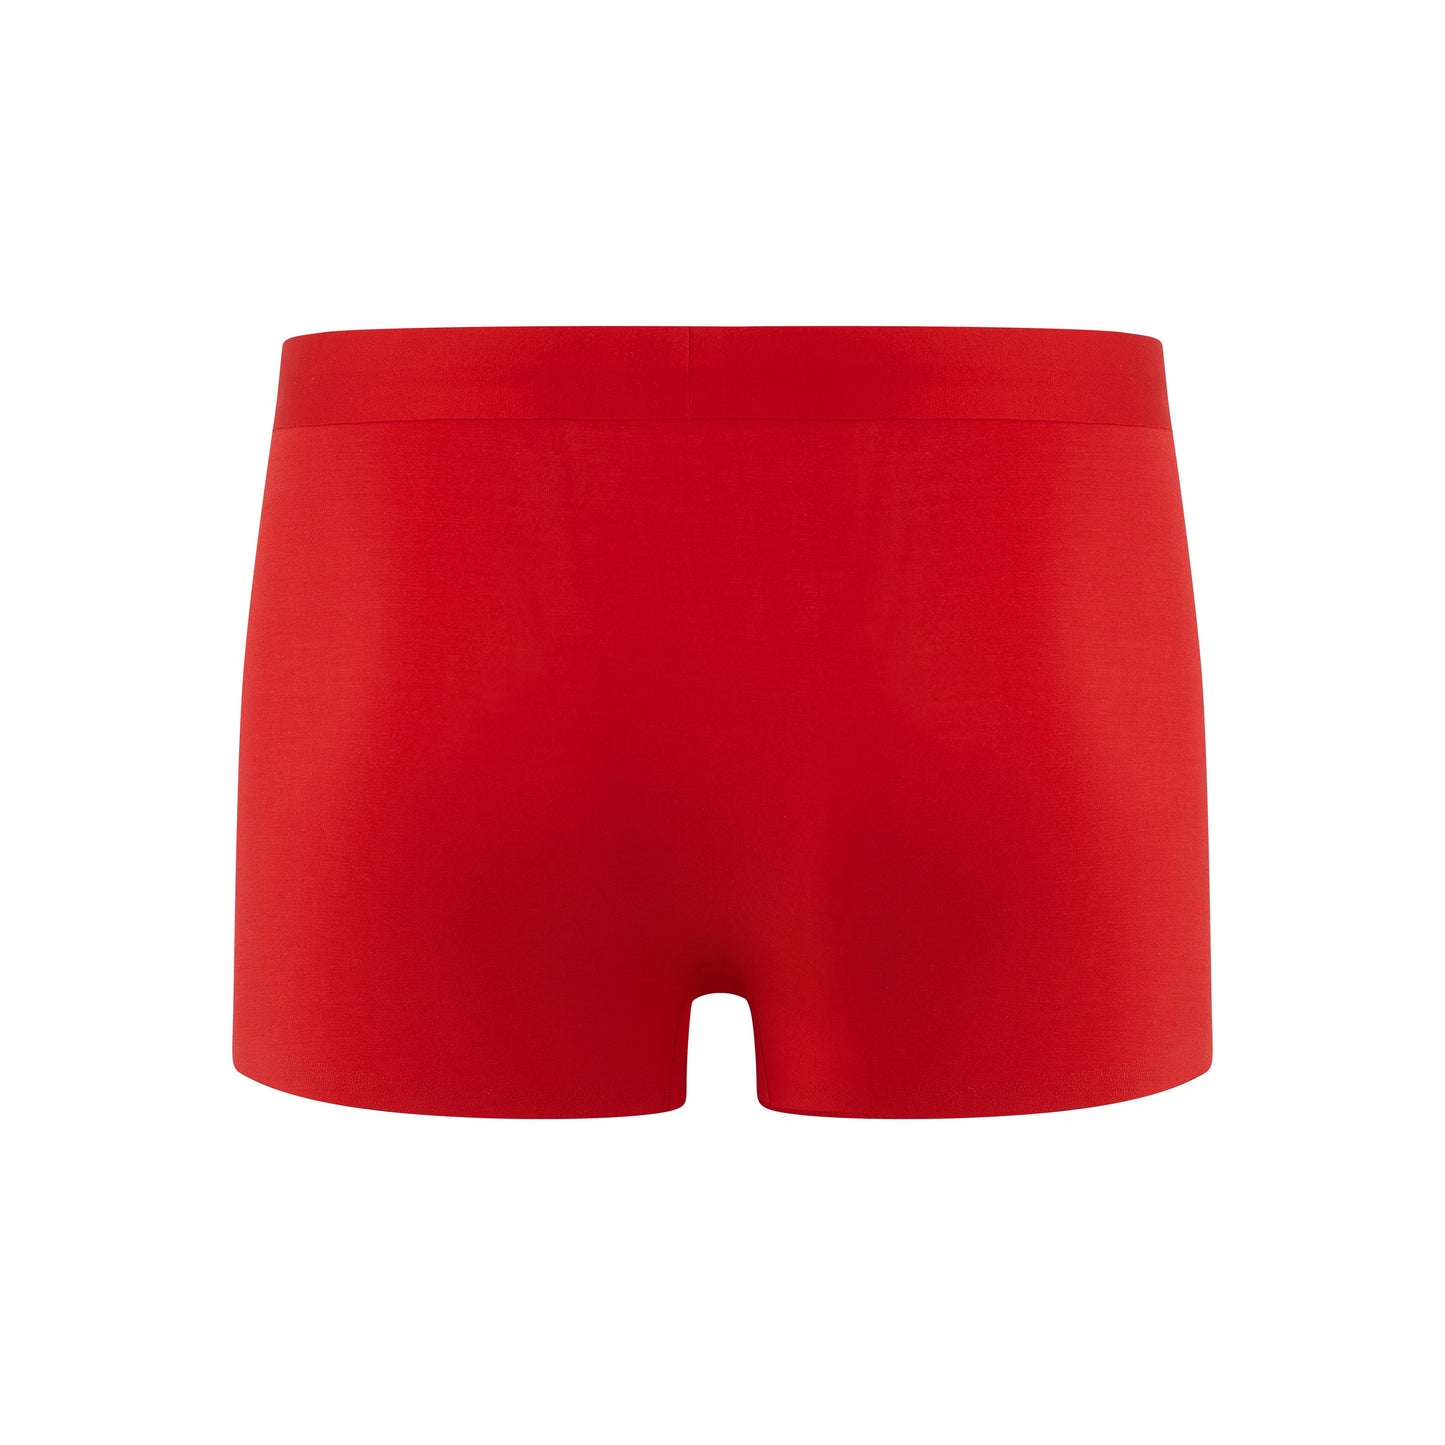 the back of a pair of red brief